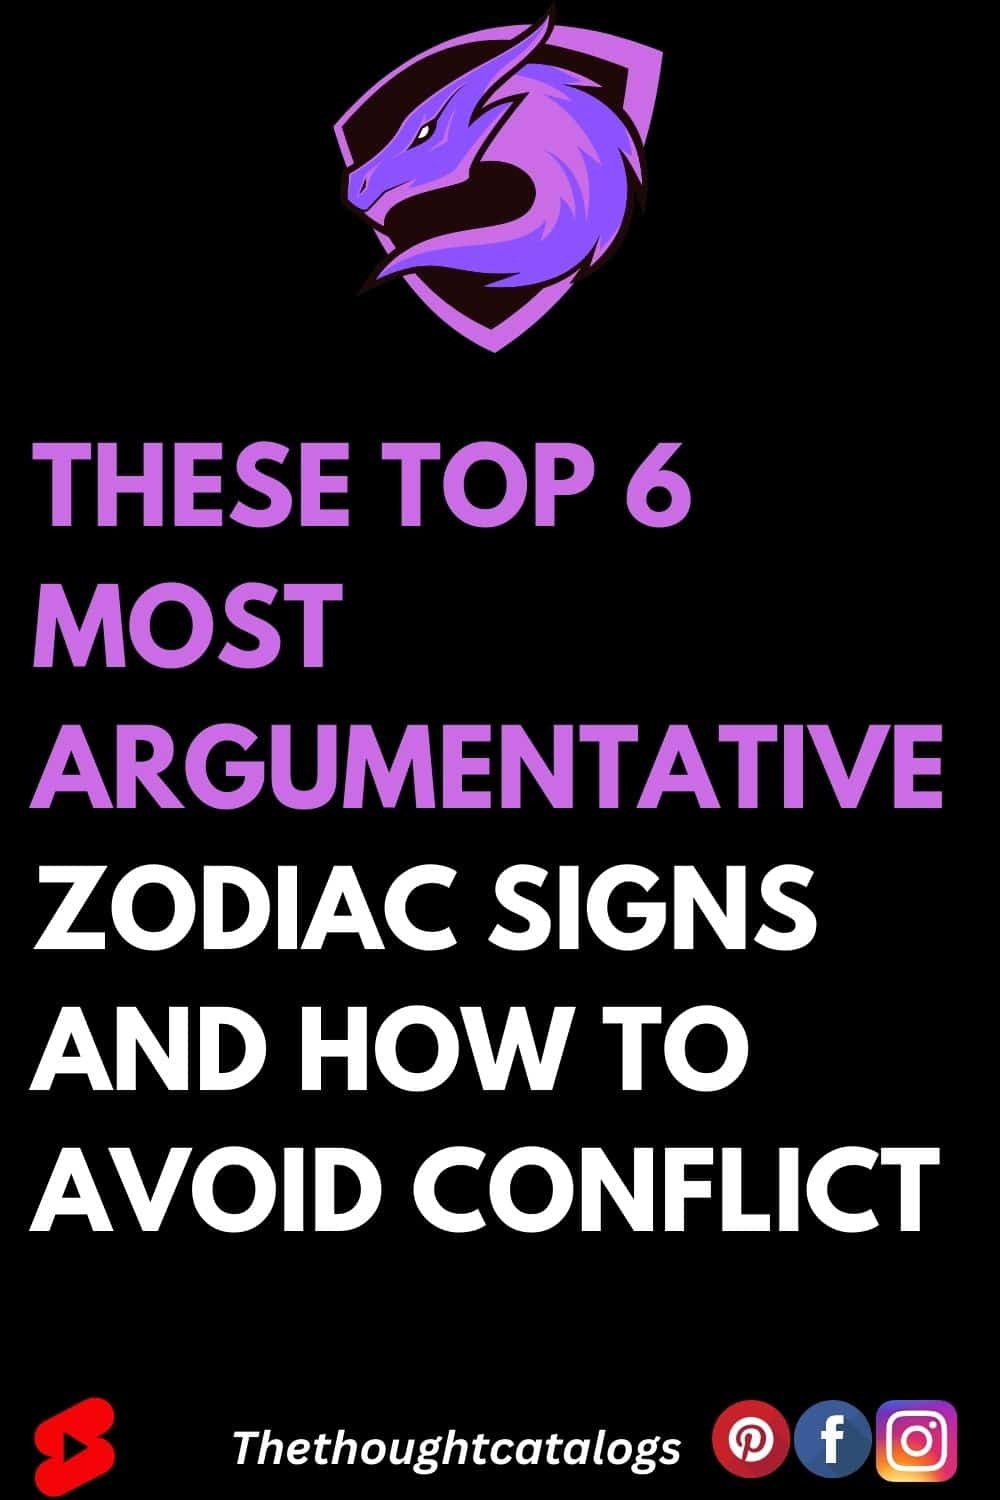 These Top 6 Most Argumentative Zodiac Signs And How To Avoid Conflict